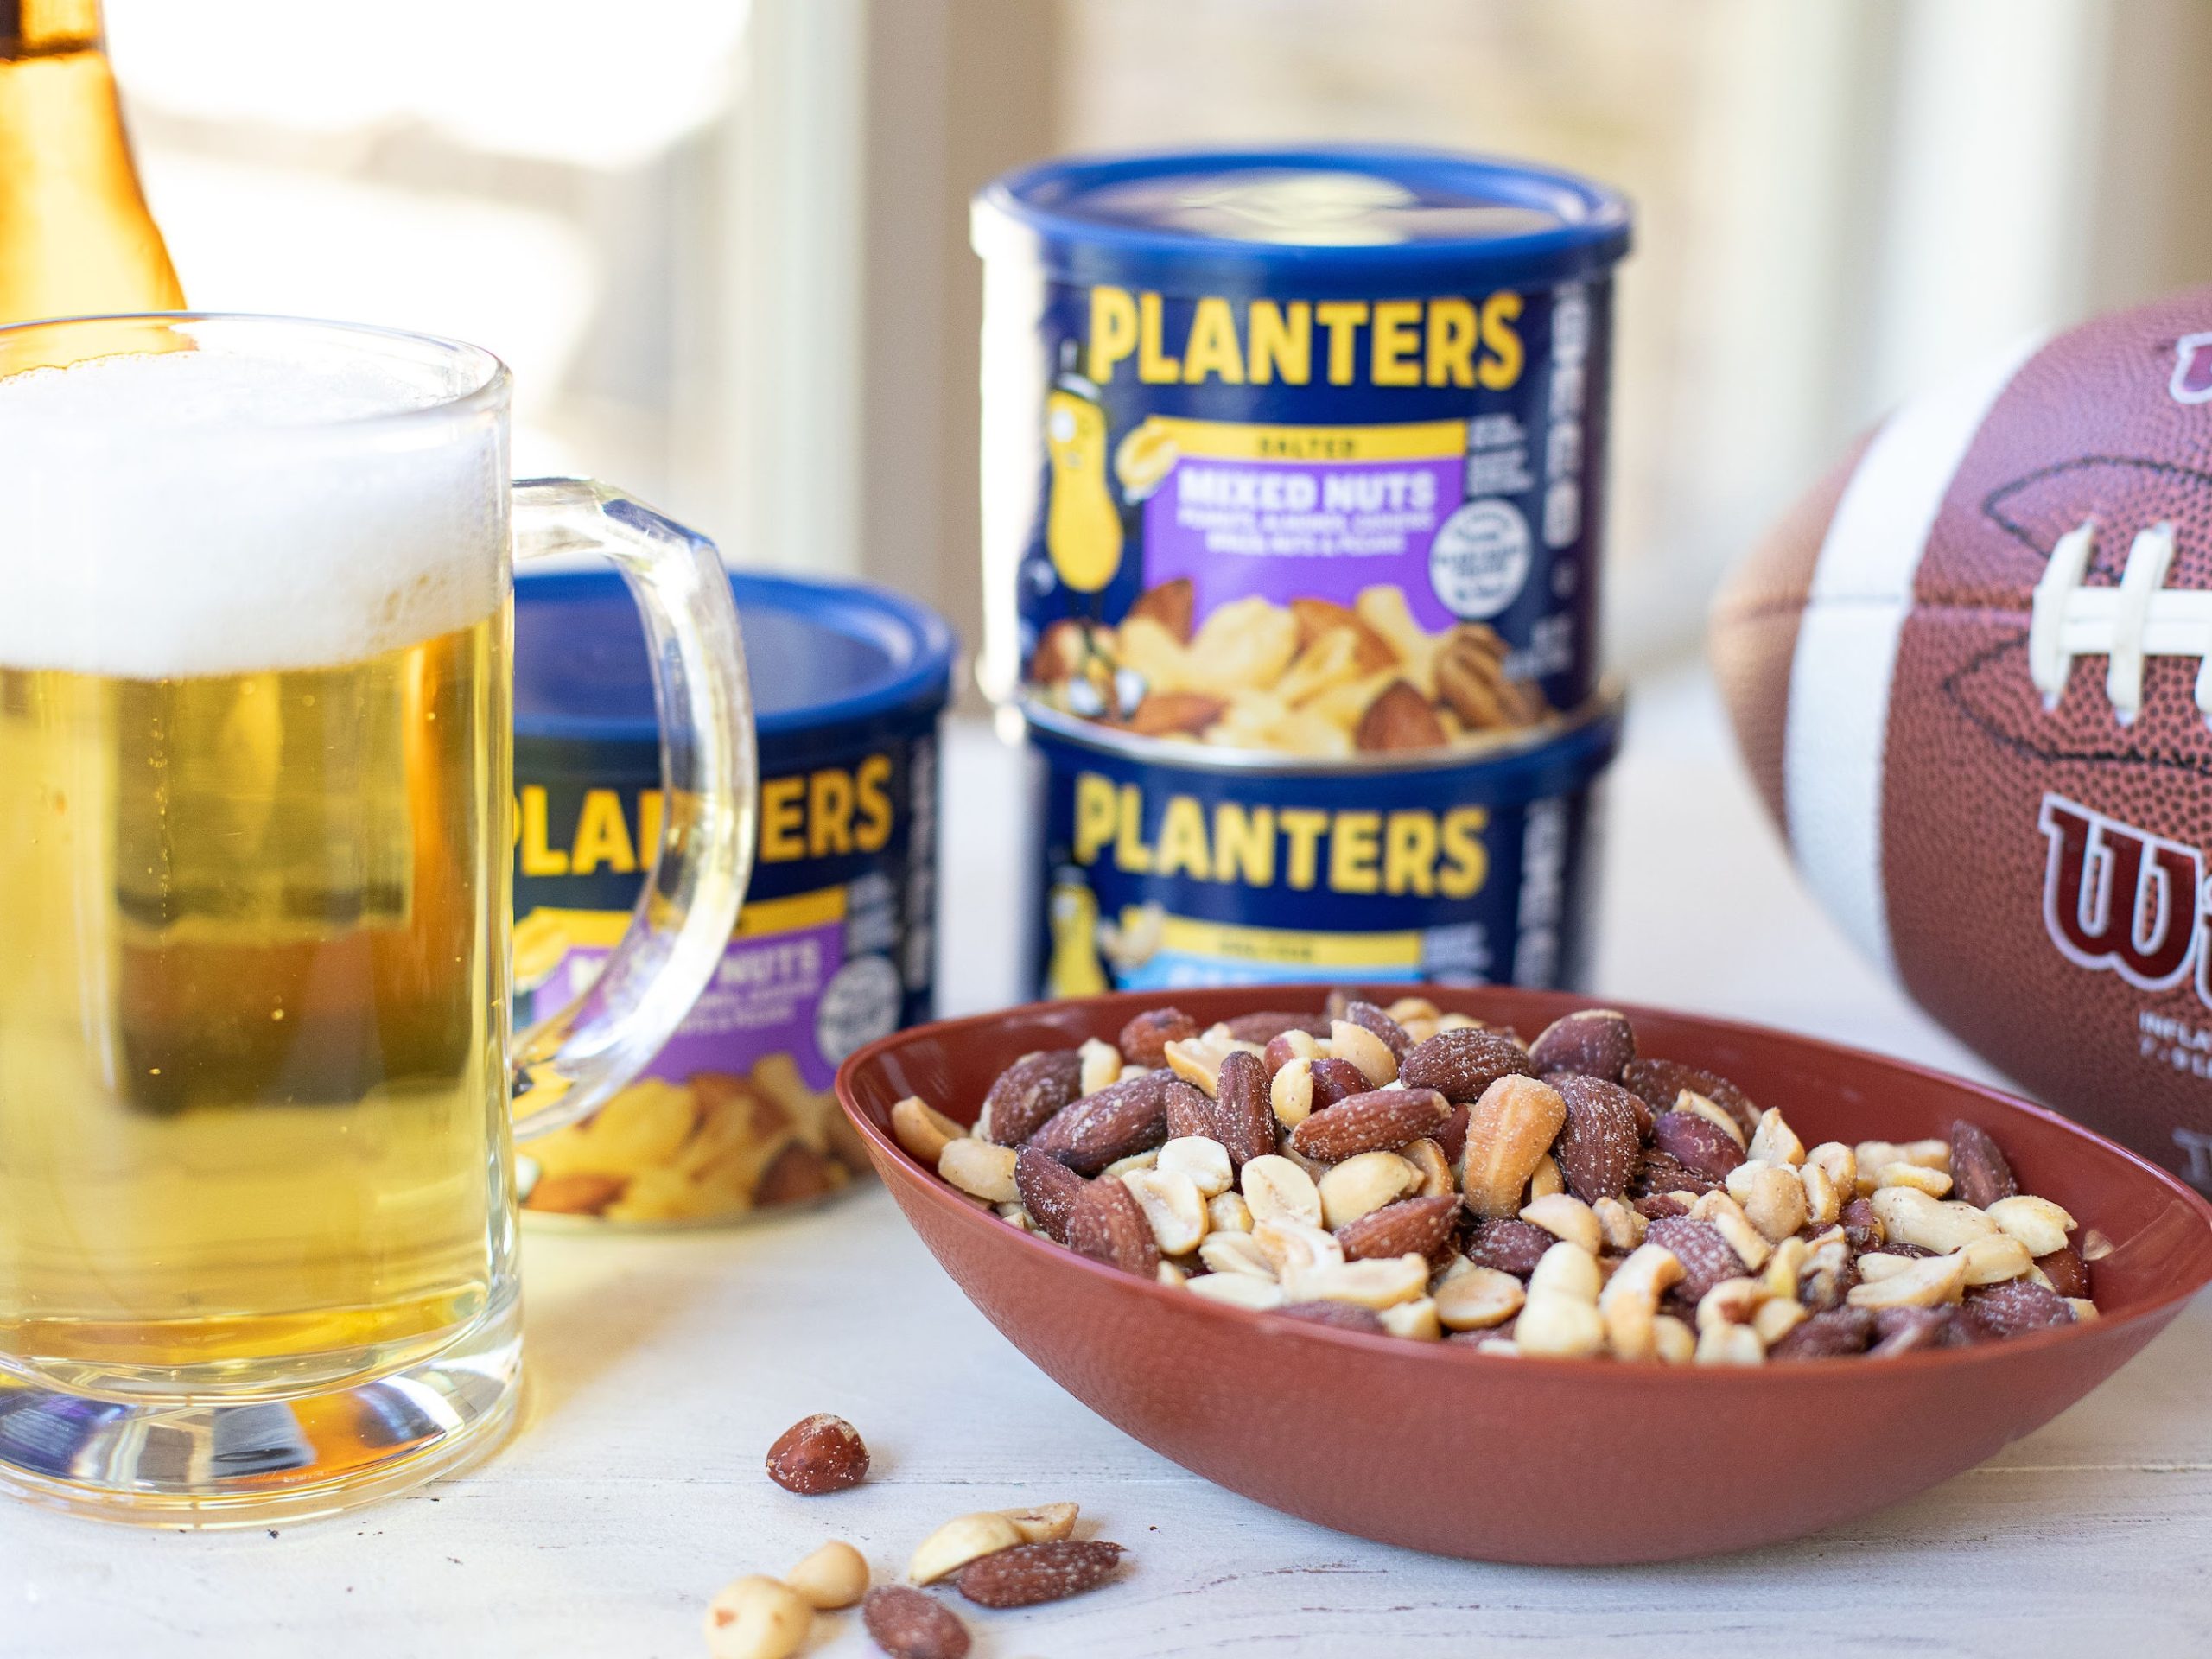 Entertain With Ease Thanks To Planters Nuts - Buy One, Get One FREE! on I Heart Publix